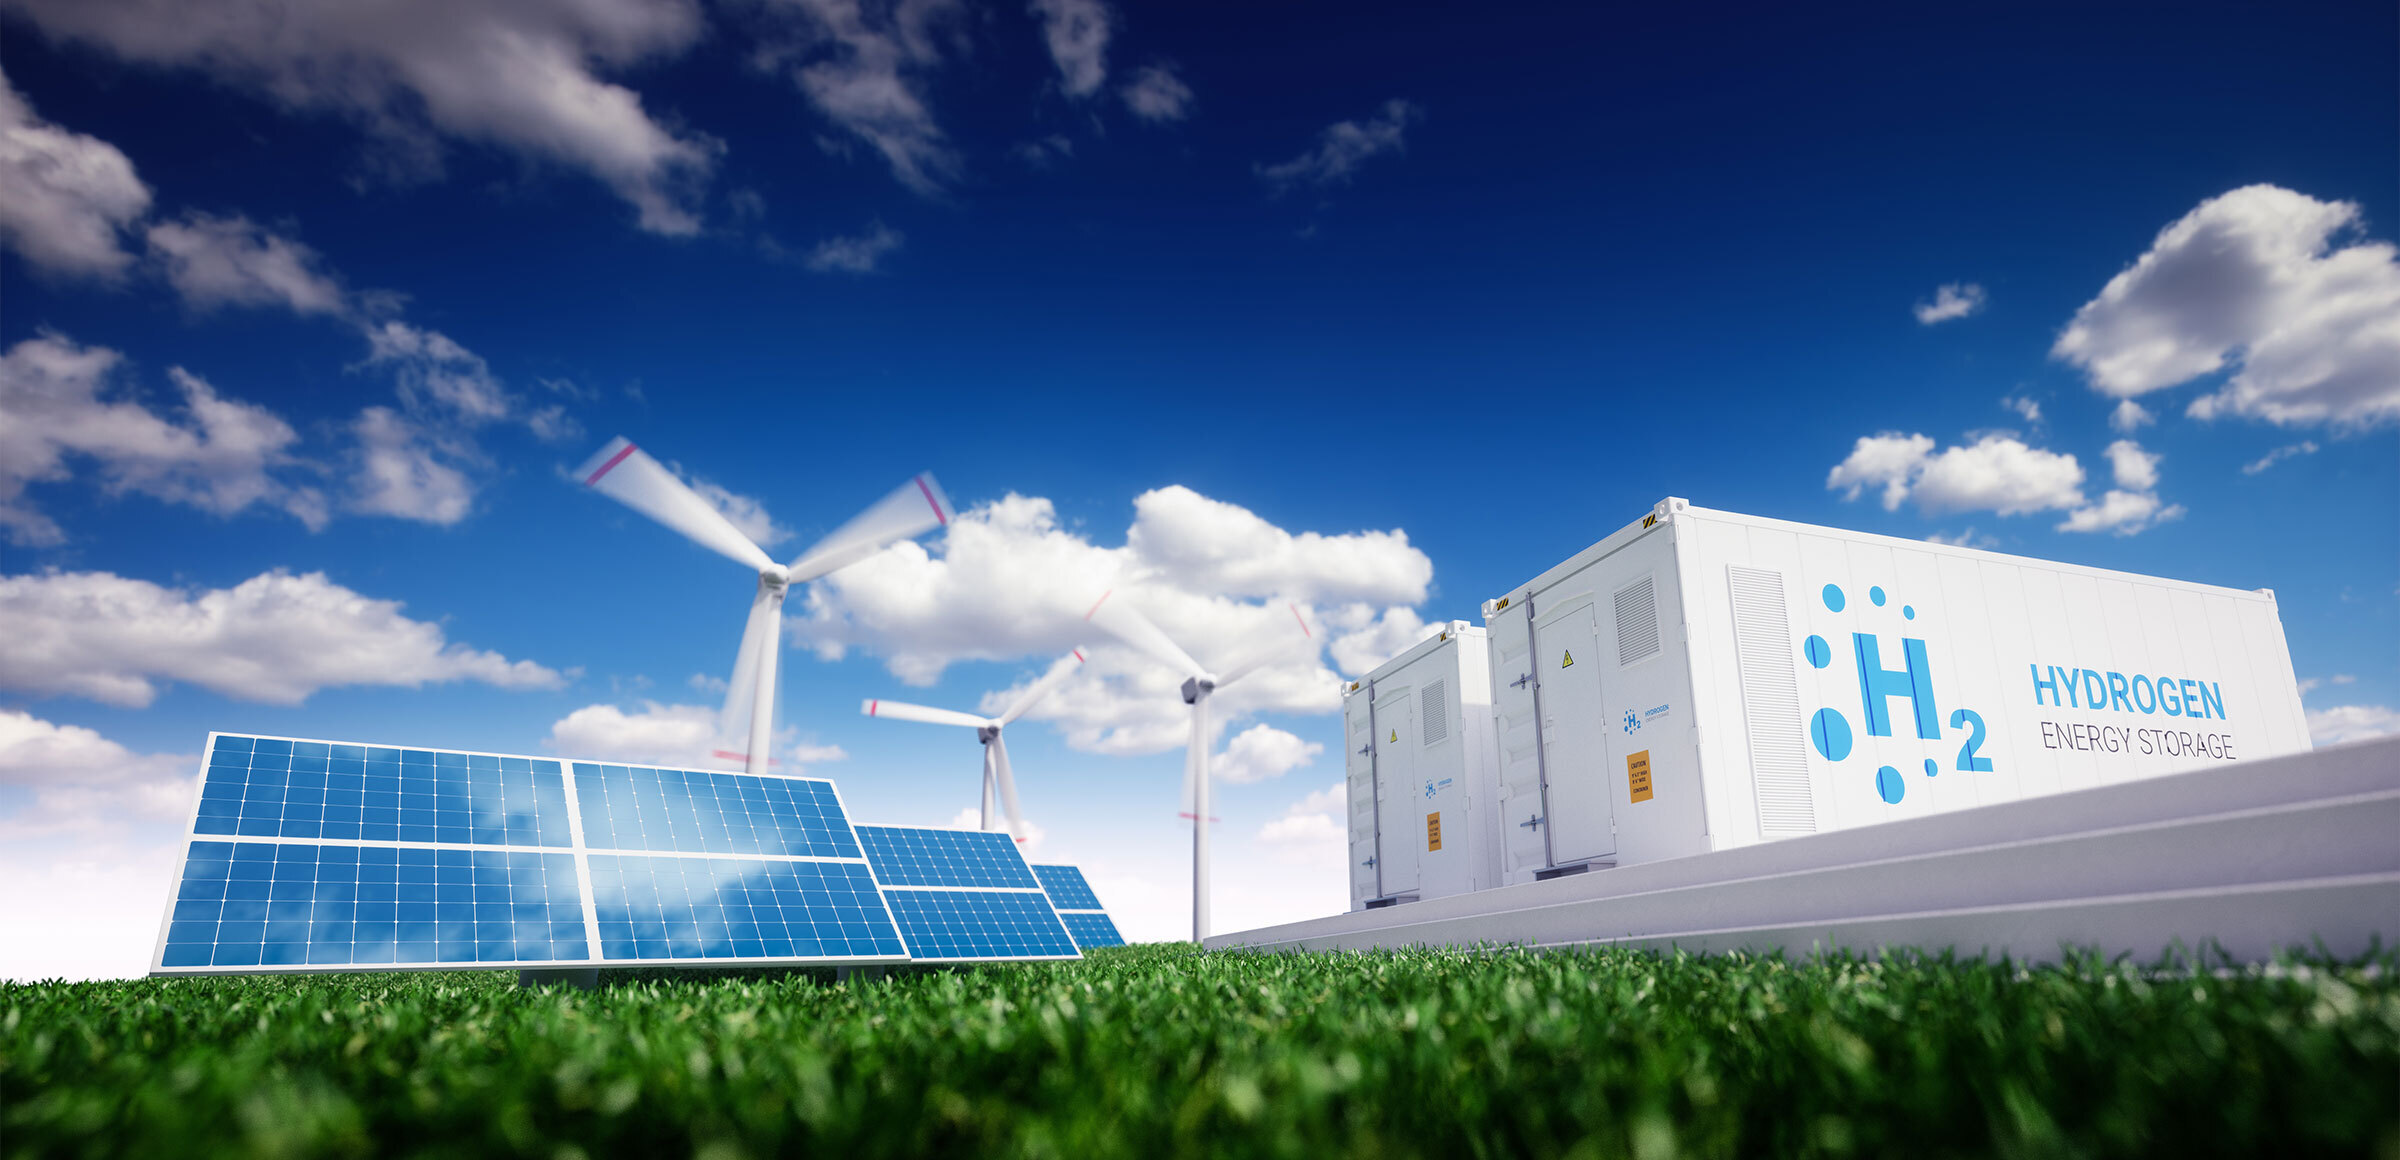 Enel Green Power is betting on green hydrogen to speed up the energy transition